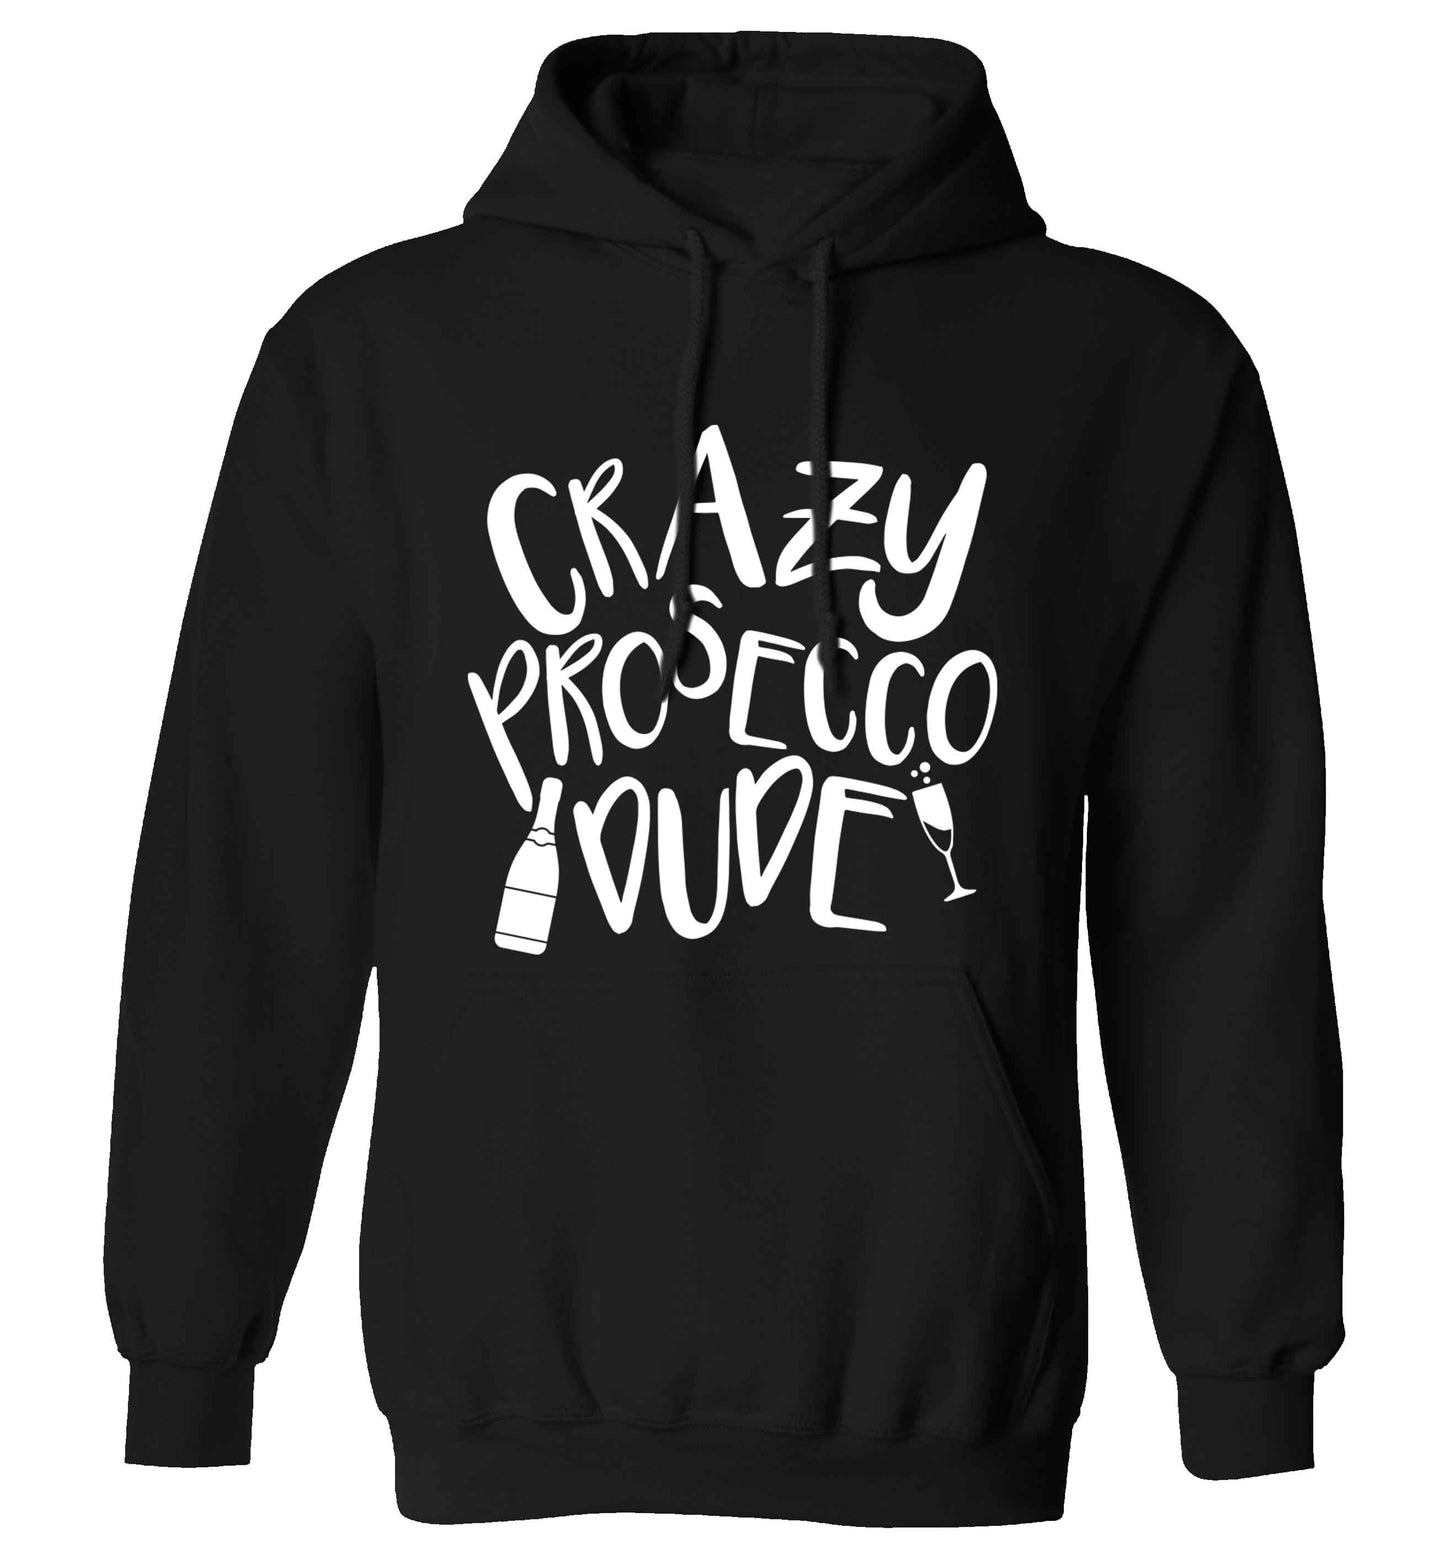 Crazy prosecco dude adults unisex black hoodie 2XL